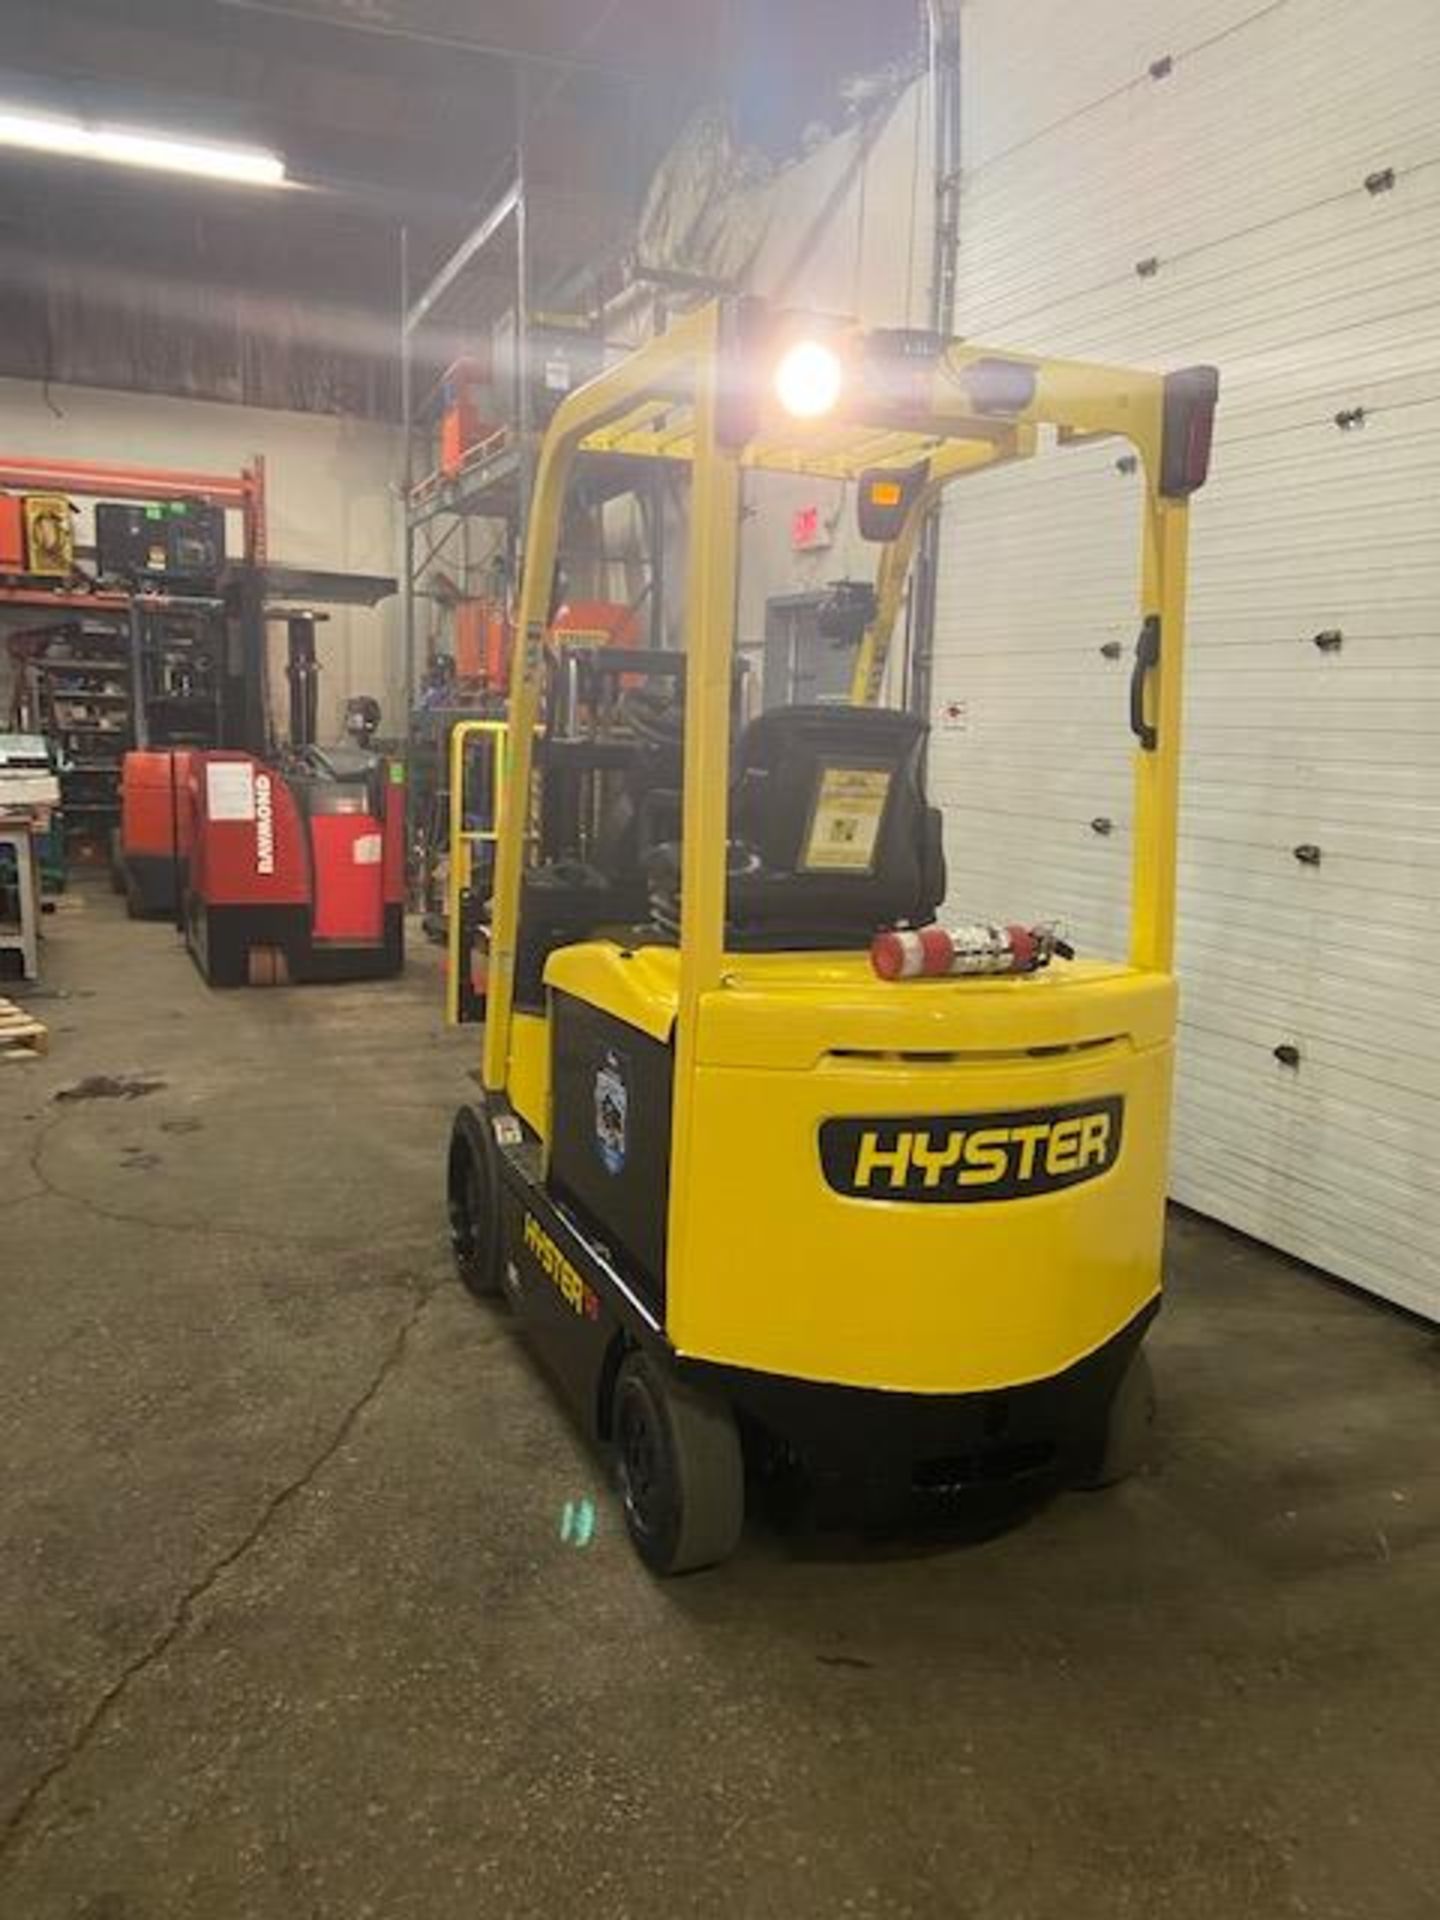 FREE CUSTOMS - 2013 Hyster 5000lbs Capacity Forklift Electric with TRUCKER MAST LOWERED with - Image 3 of 3